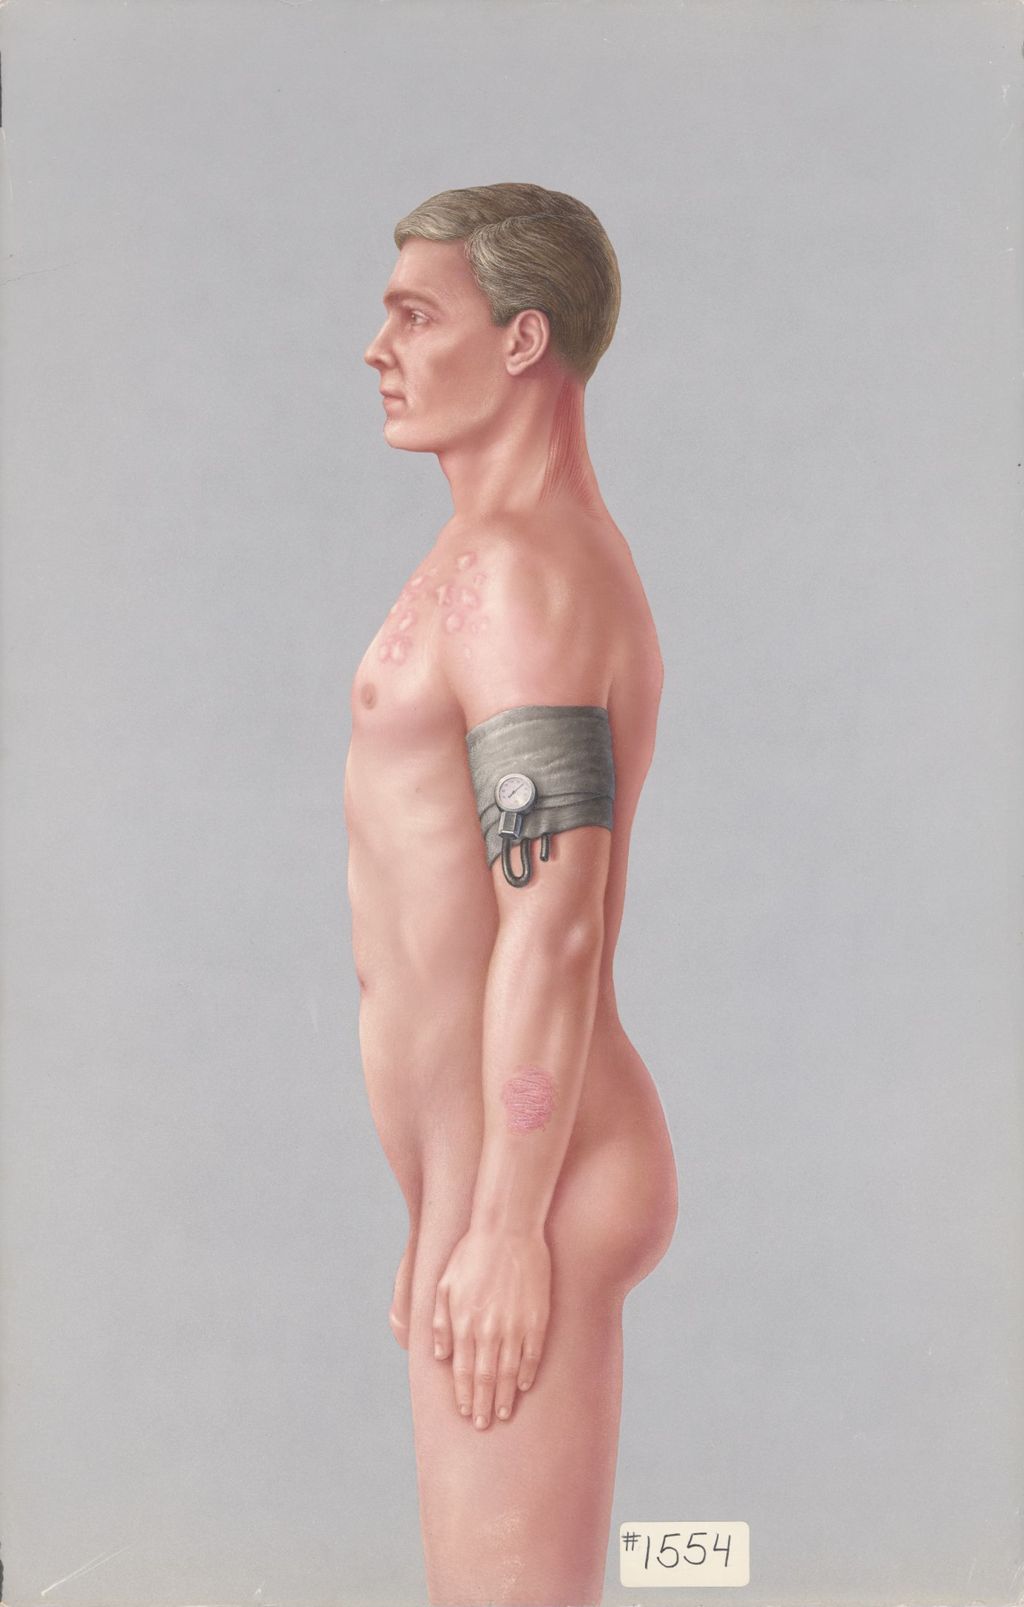 Miniature of Side profile of man with blood pressure cuff and skin lesions,